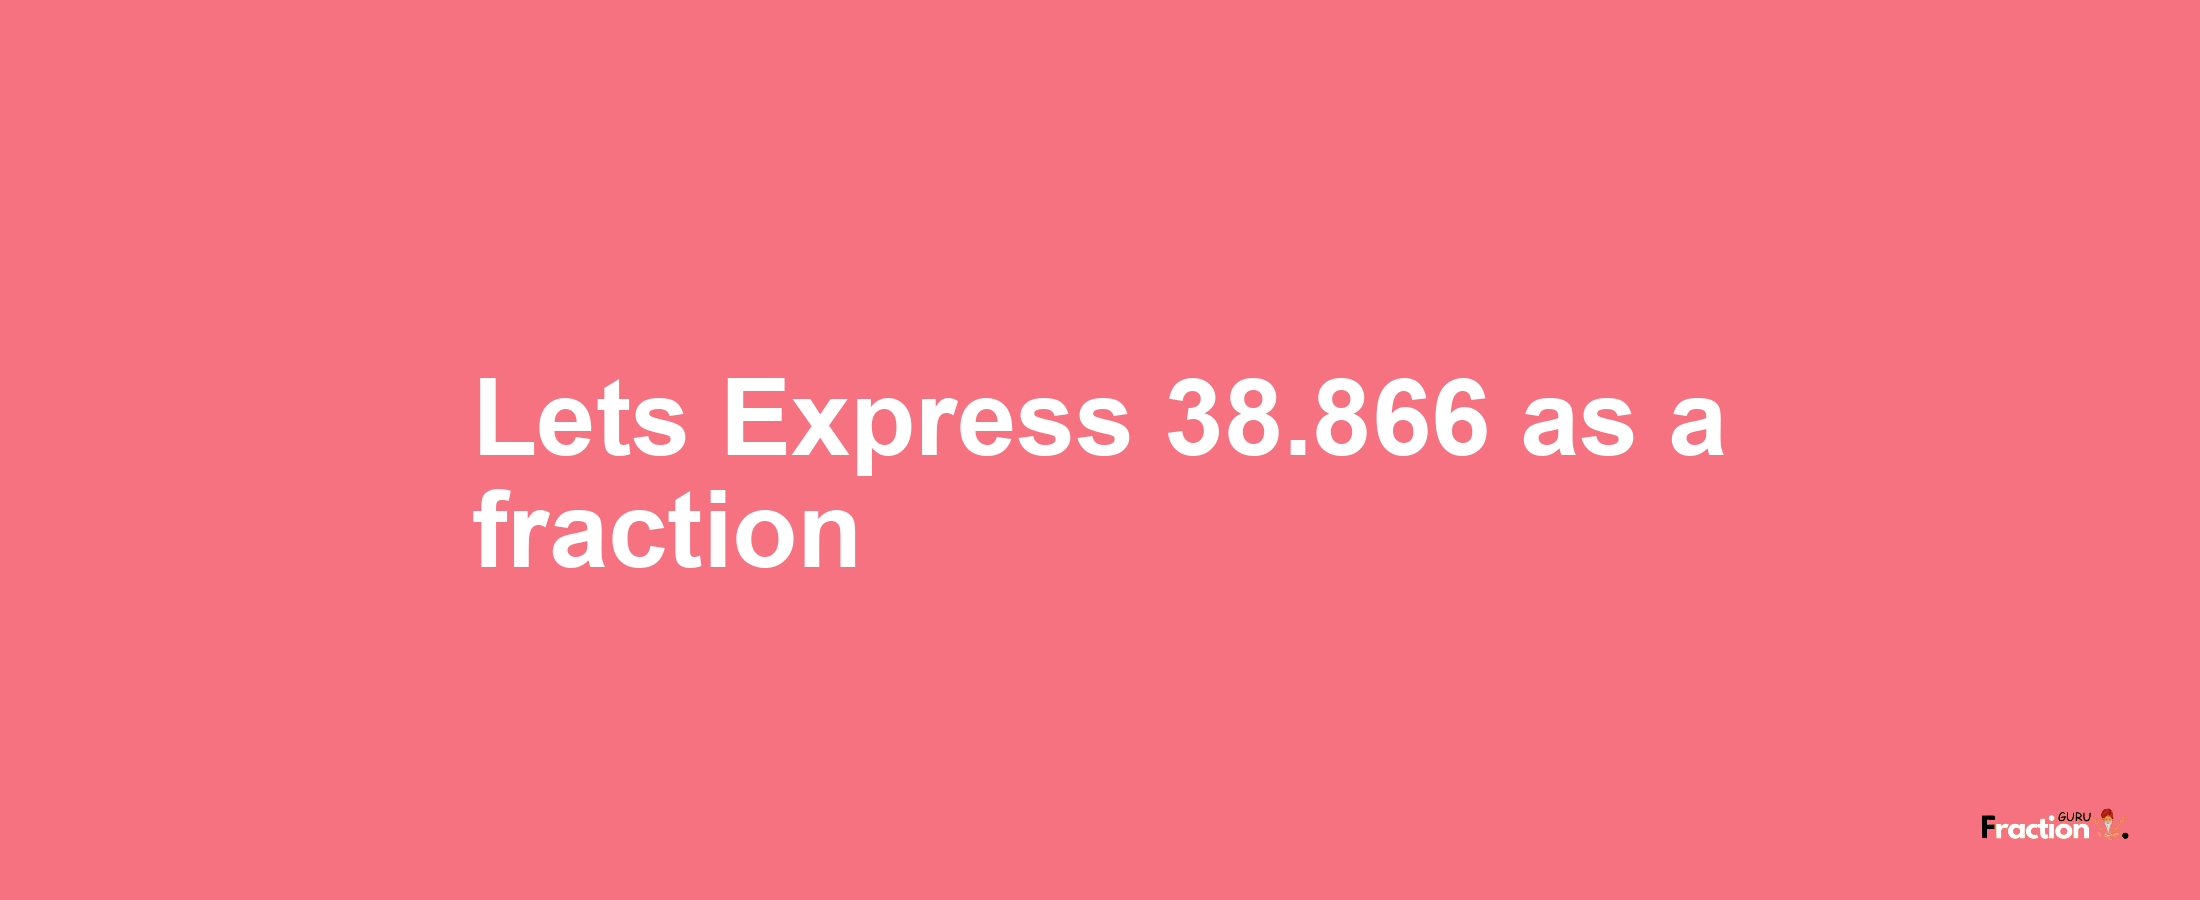 Lets Express 38.866 as afraction